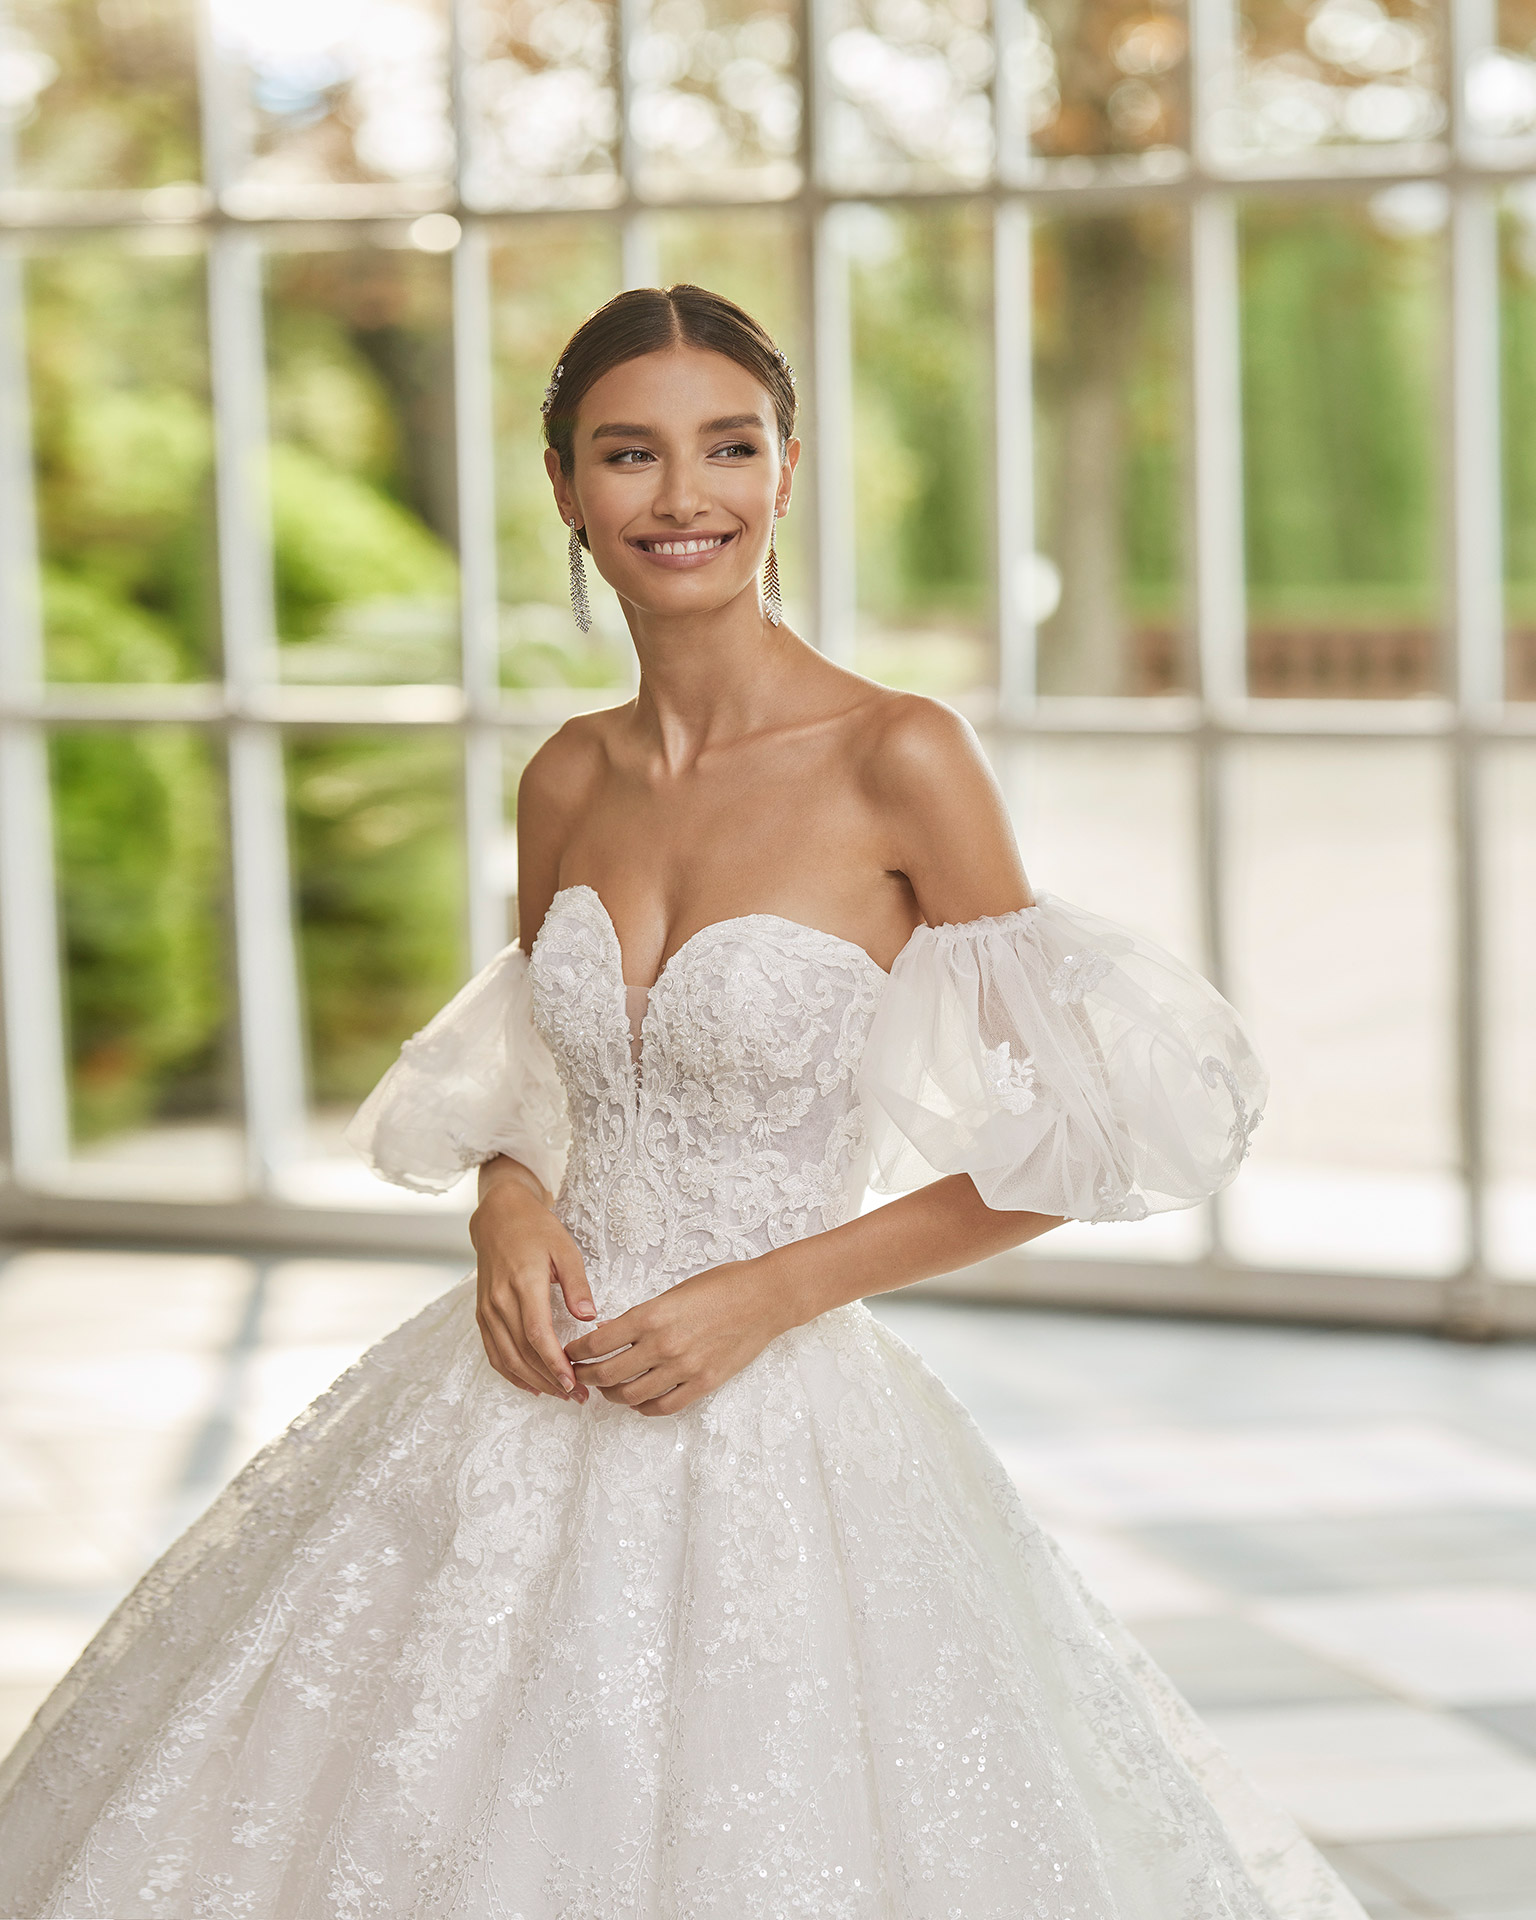 Romantic princess-style wedding dress, with a full sheath-style skirt; with a sweetheart neckline, a corset back, and puffed tulle sleeves. Dreamy Luna Studio dress made of tulle and lace, with beadwork finishes. LUNA_NOVIAS.